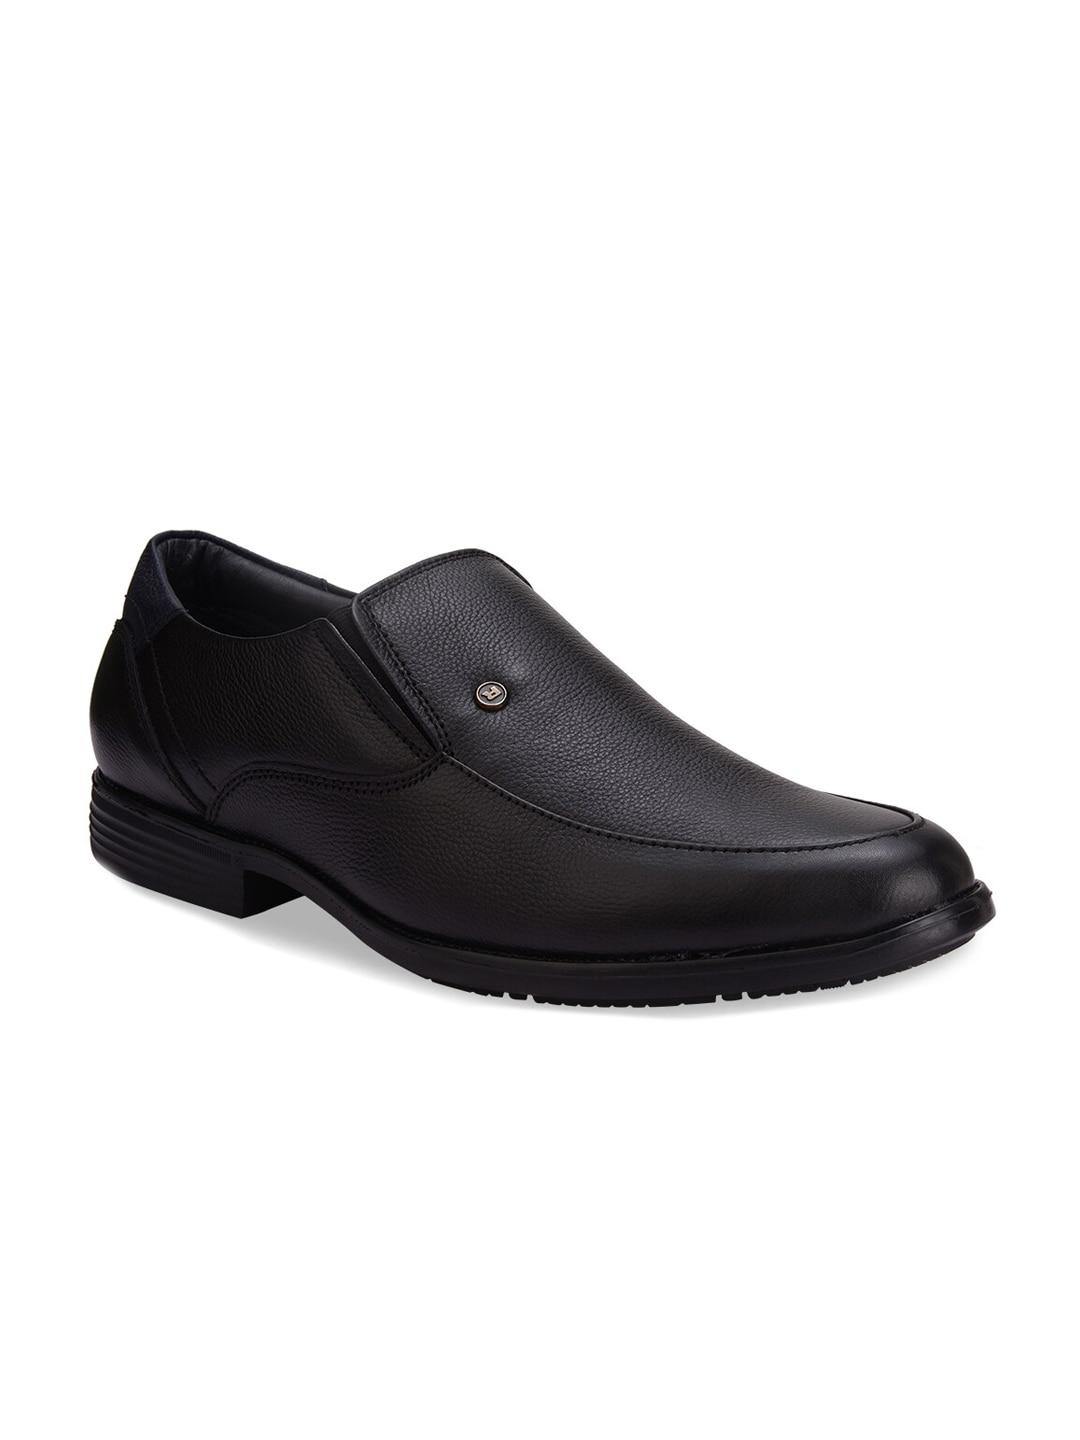 Regal Men Textured Pure Leather Formal Slip On Shoes